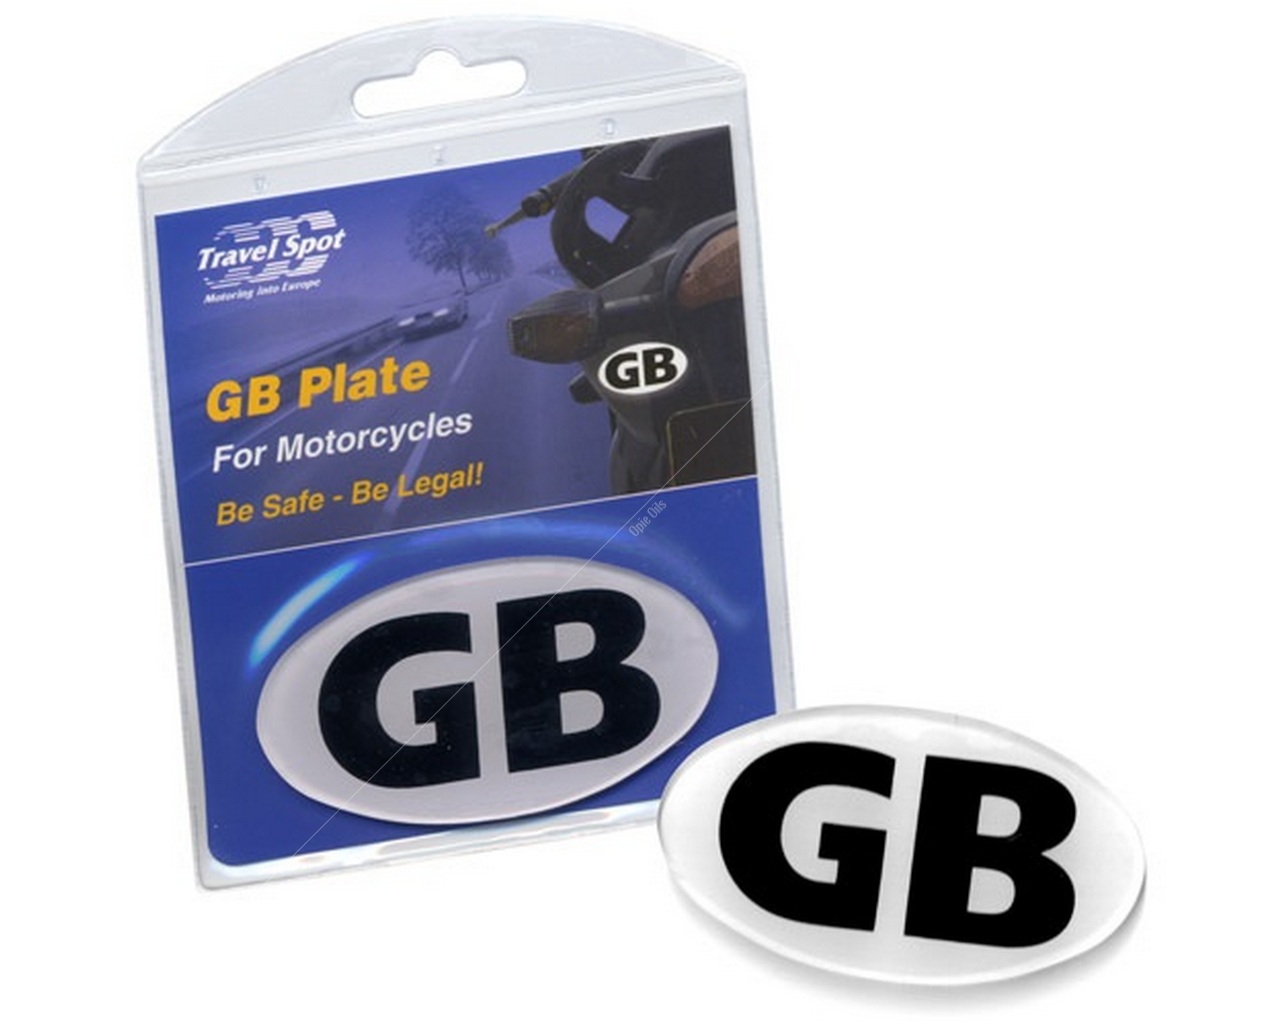 Travel Spot 91150A GB Plate for Motorcycles 